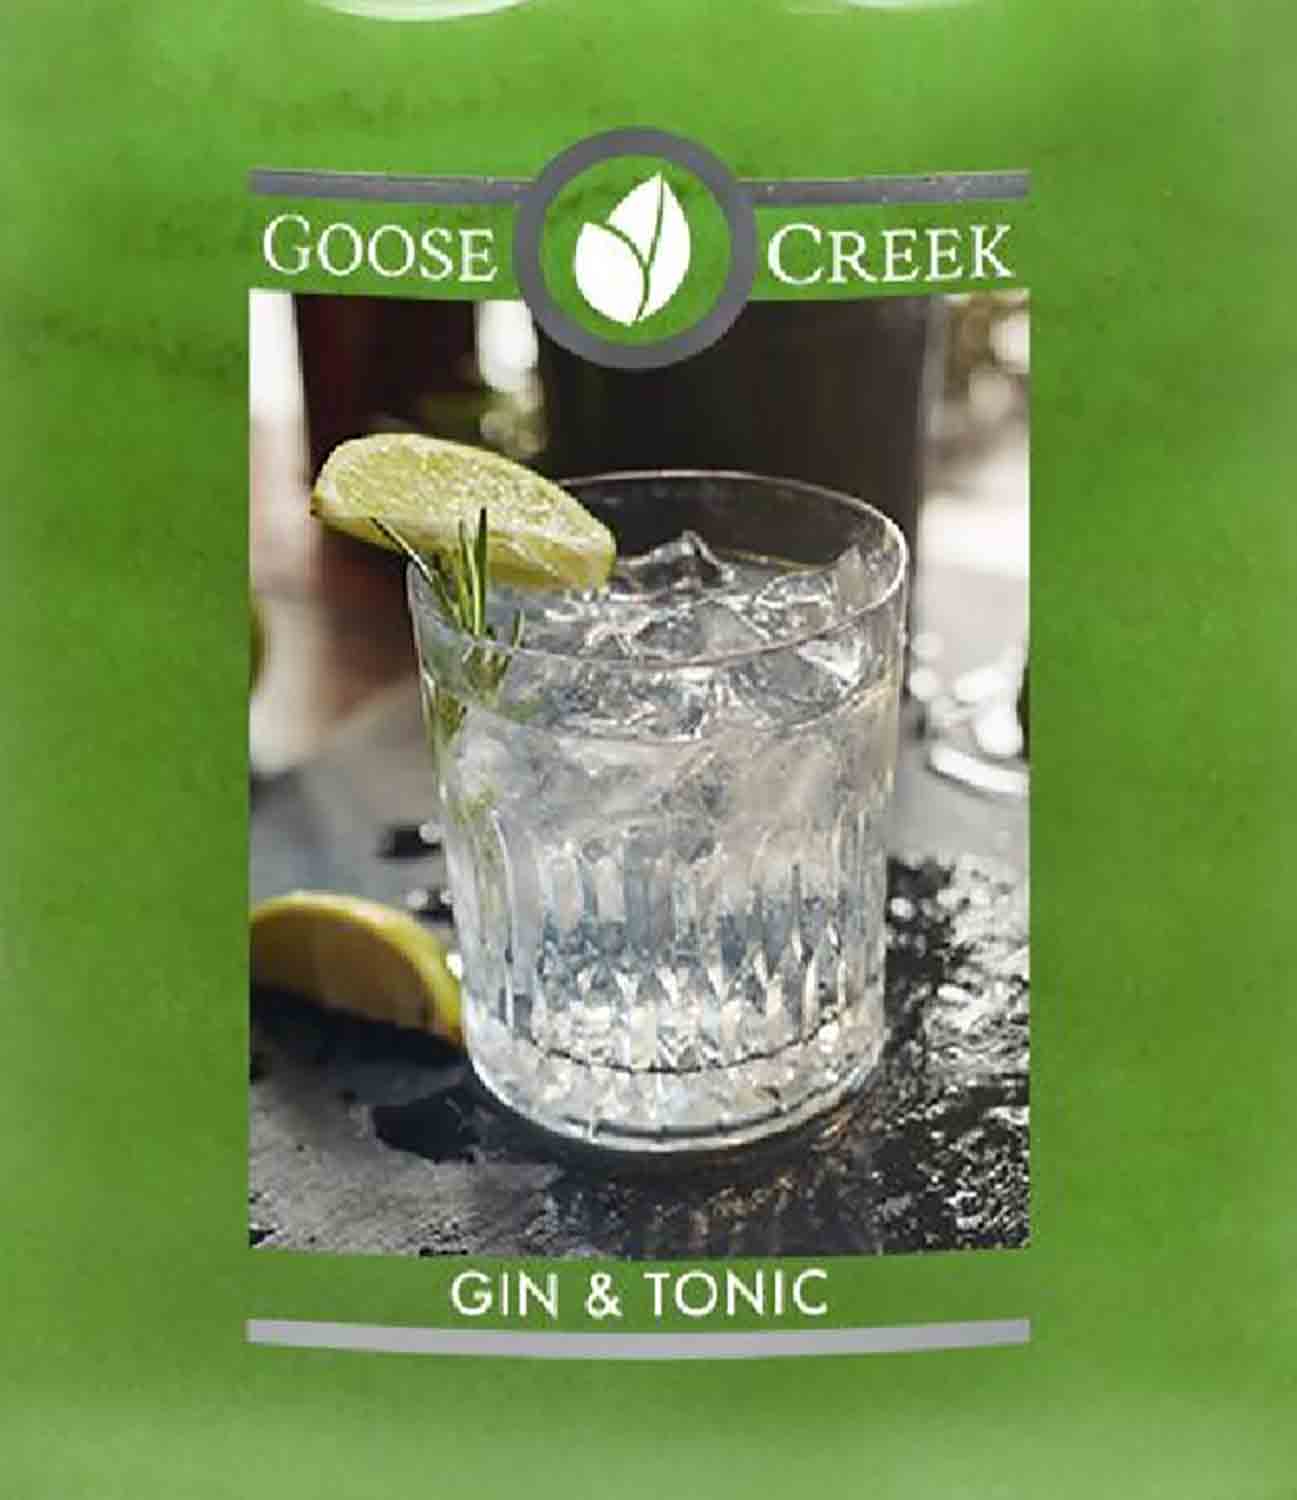 Gin and Tonic Goose Creek 22 g - Crumble vosk